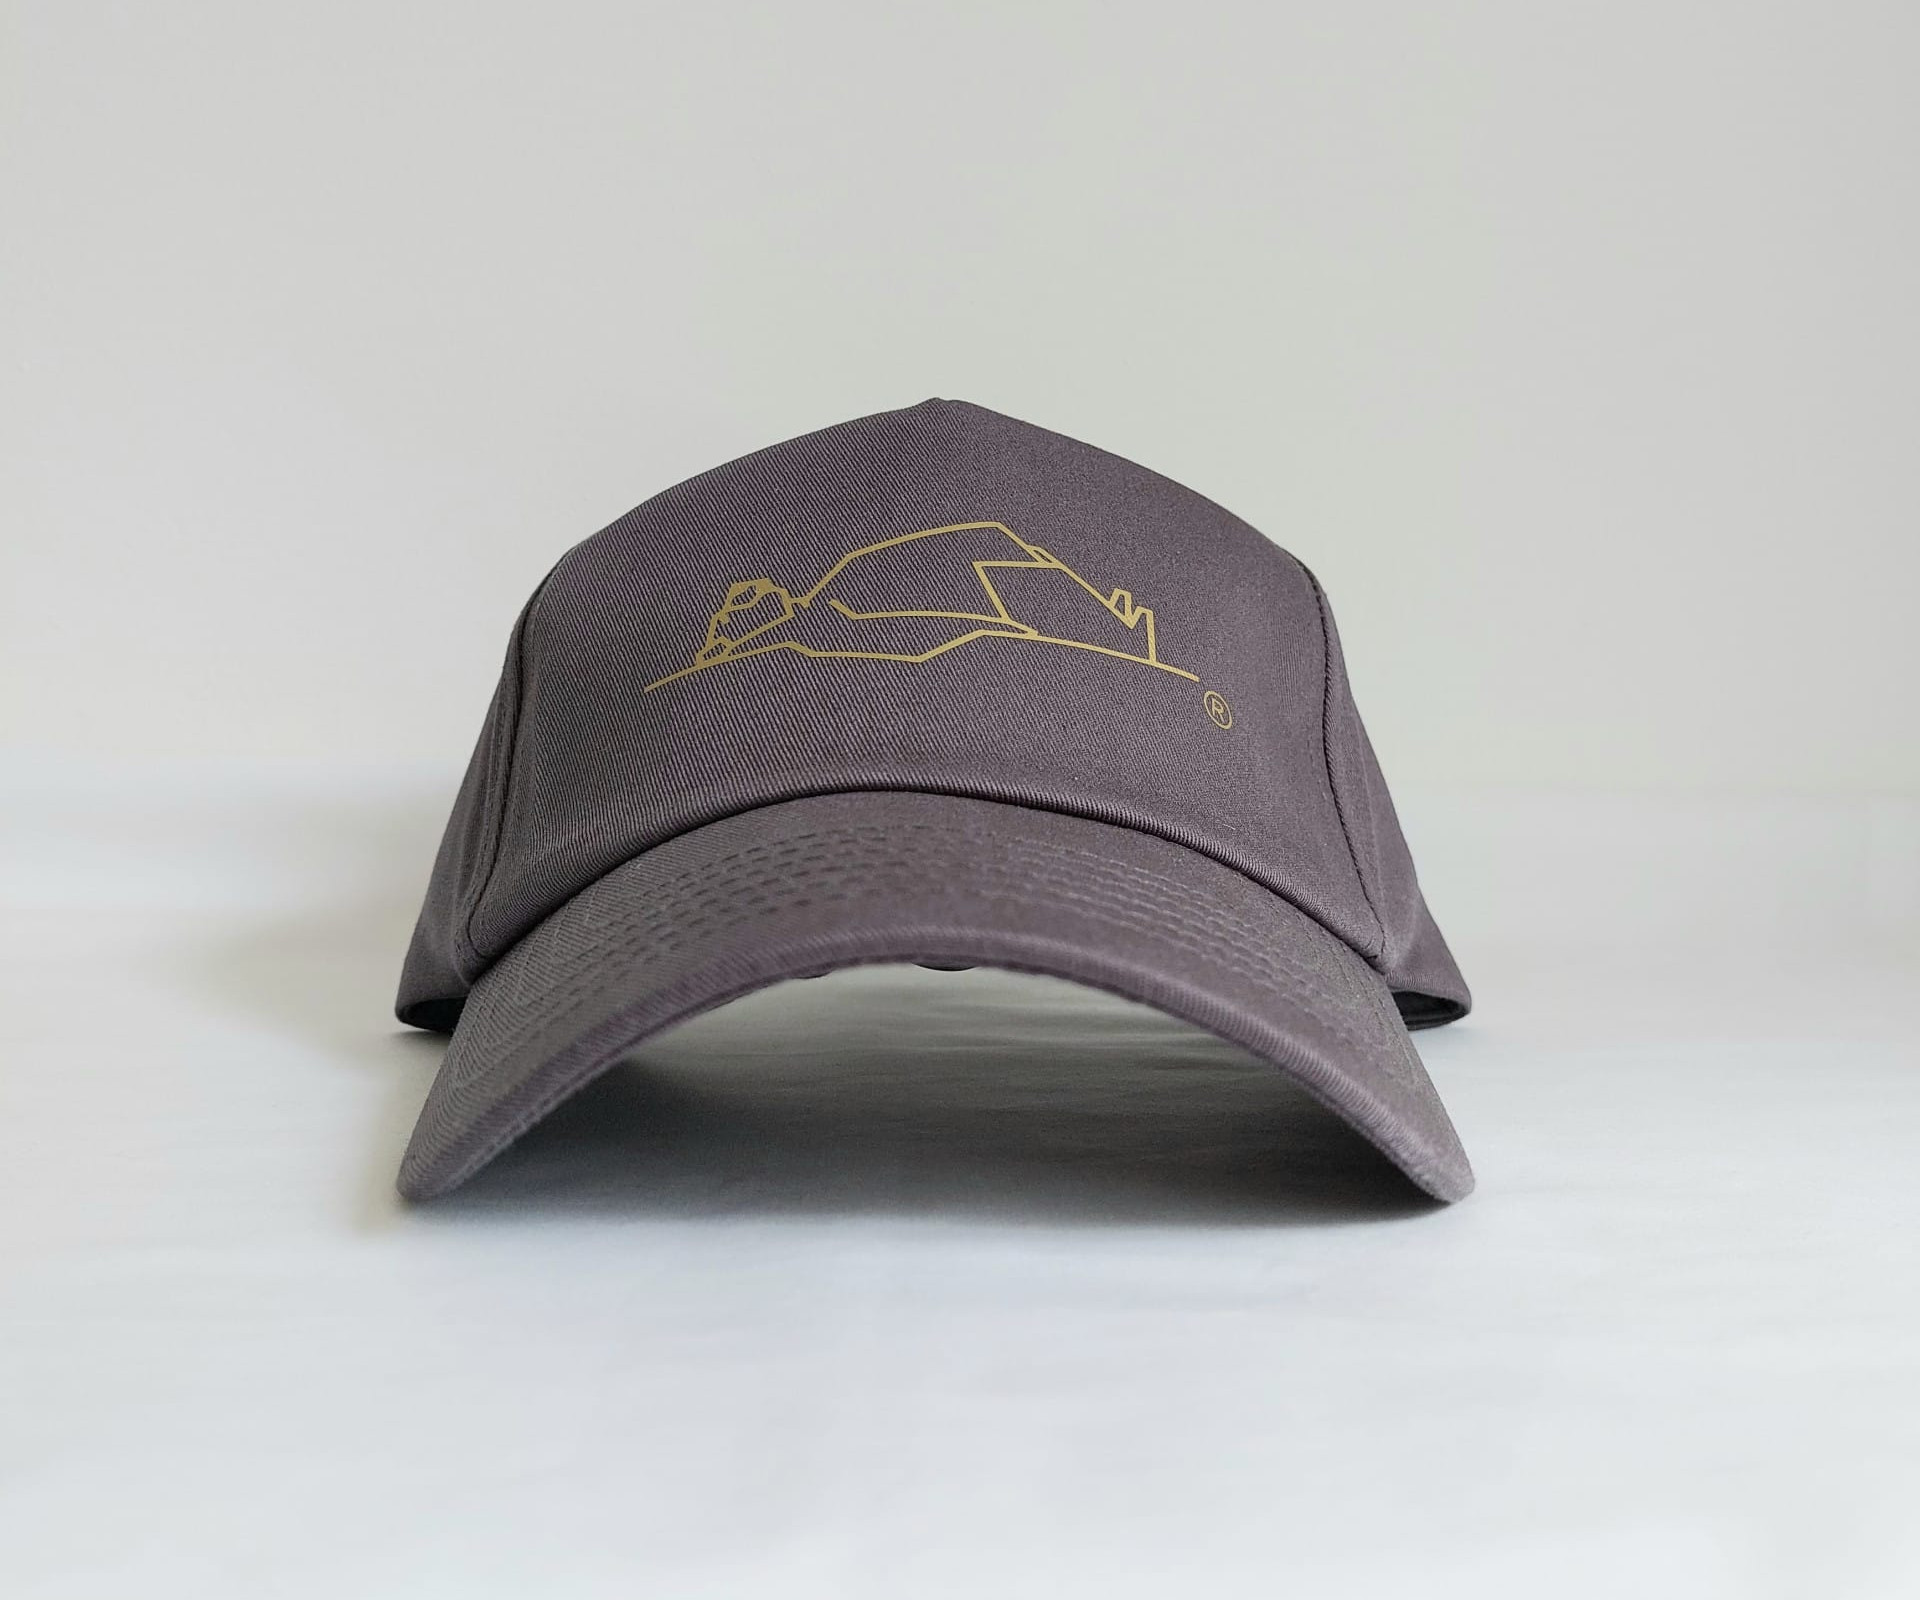 Front view of LayBakPak cap showing bear image from logo